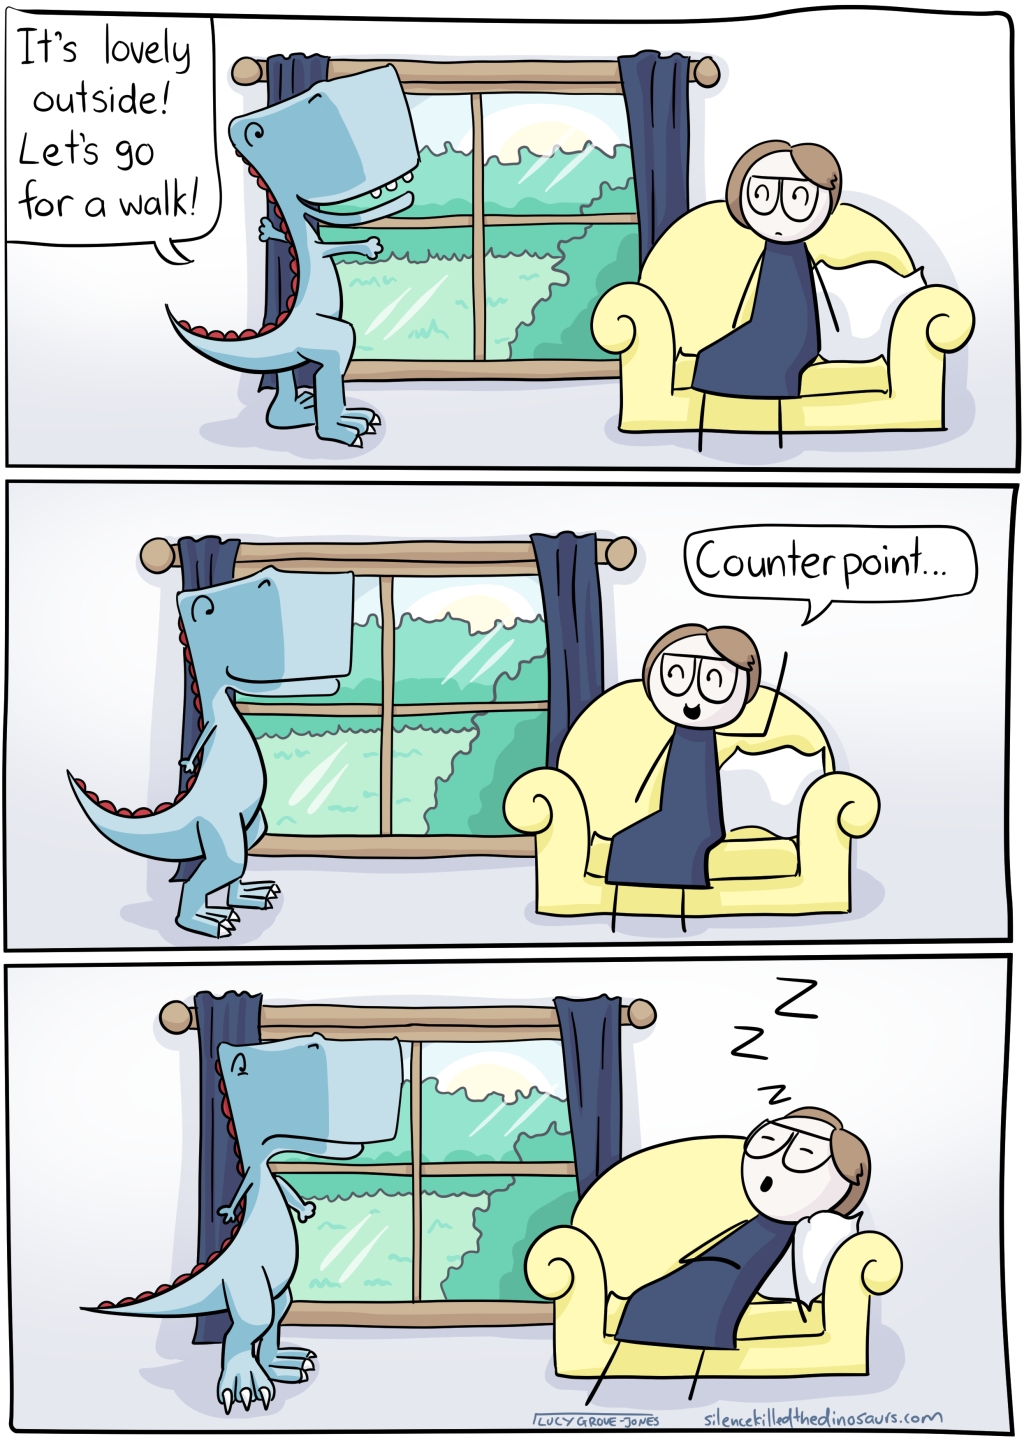 3 panels. First panel, I sit on a couch, dinosaur looks out window and says 'It's lovely outside! Let's go for a walk!' Second panel, I say, 'Counterpoint...' Third panel, I have flopped backward and am having a nap.